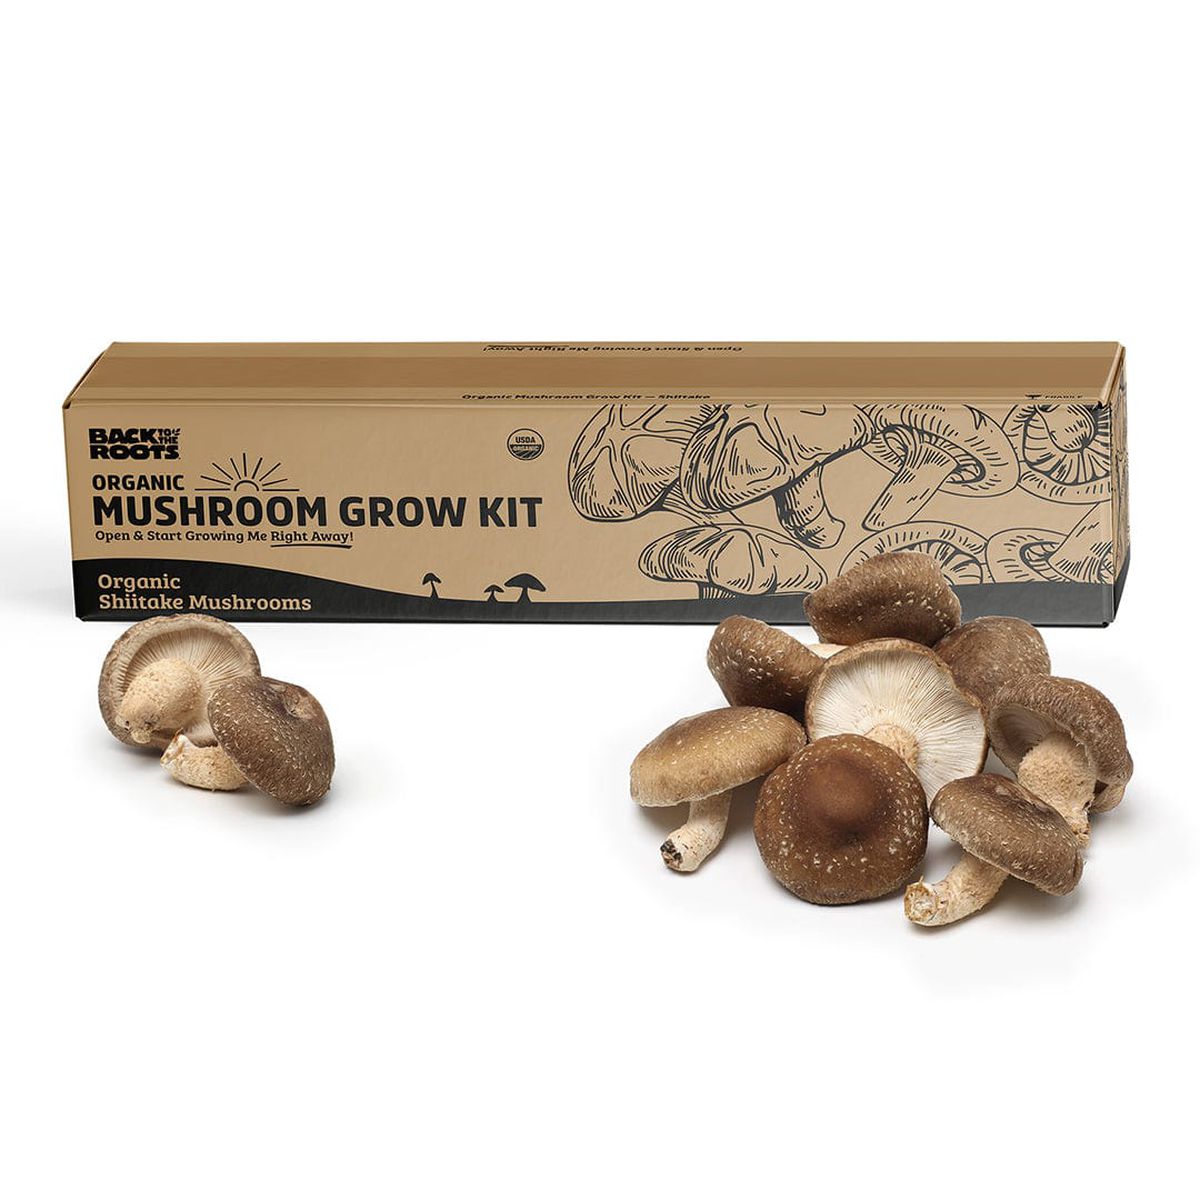 a pile of mushrooms in front of a cardboard box containing a mushroom grow kit